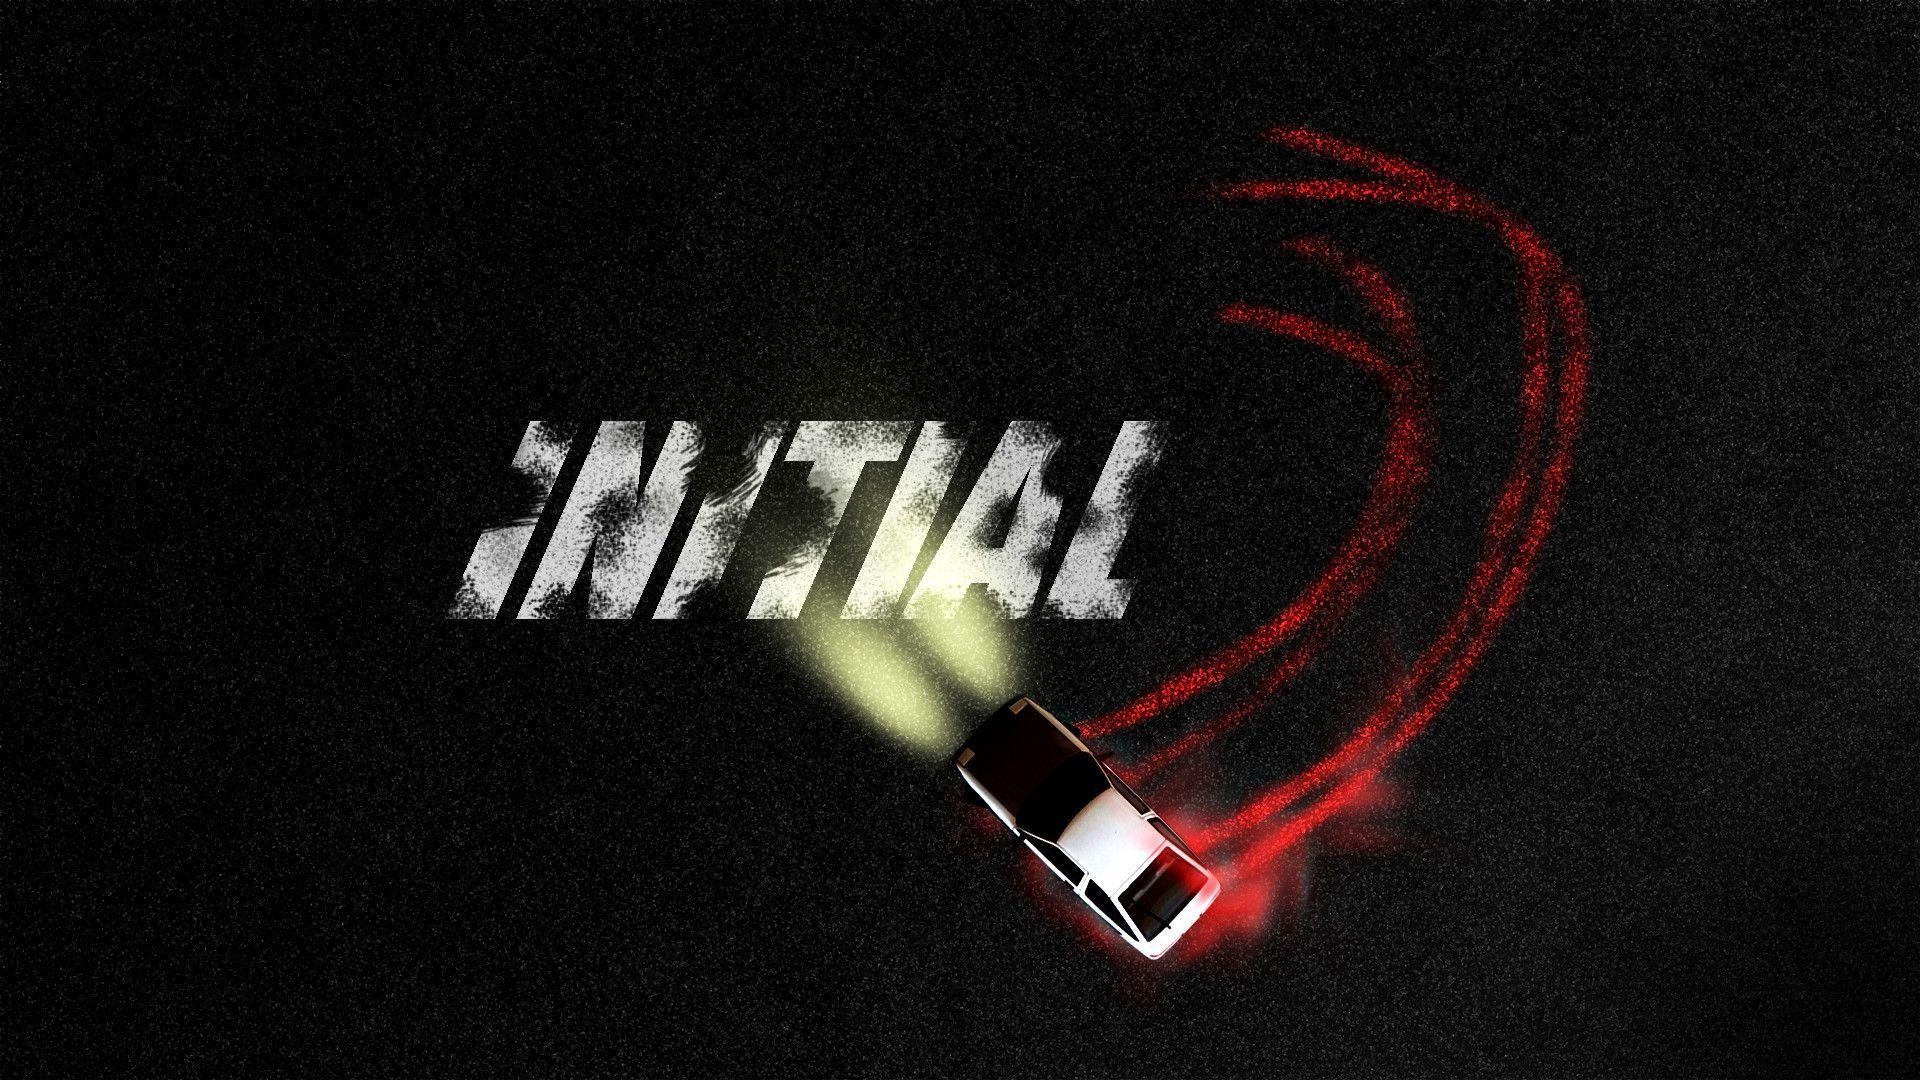 Initial D Anime, Free download wallpapers, Desktop and mobile, Initial wallpapers, 1920x1080 Full HD Desktop